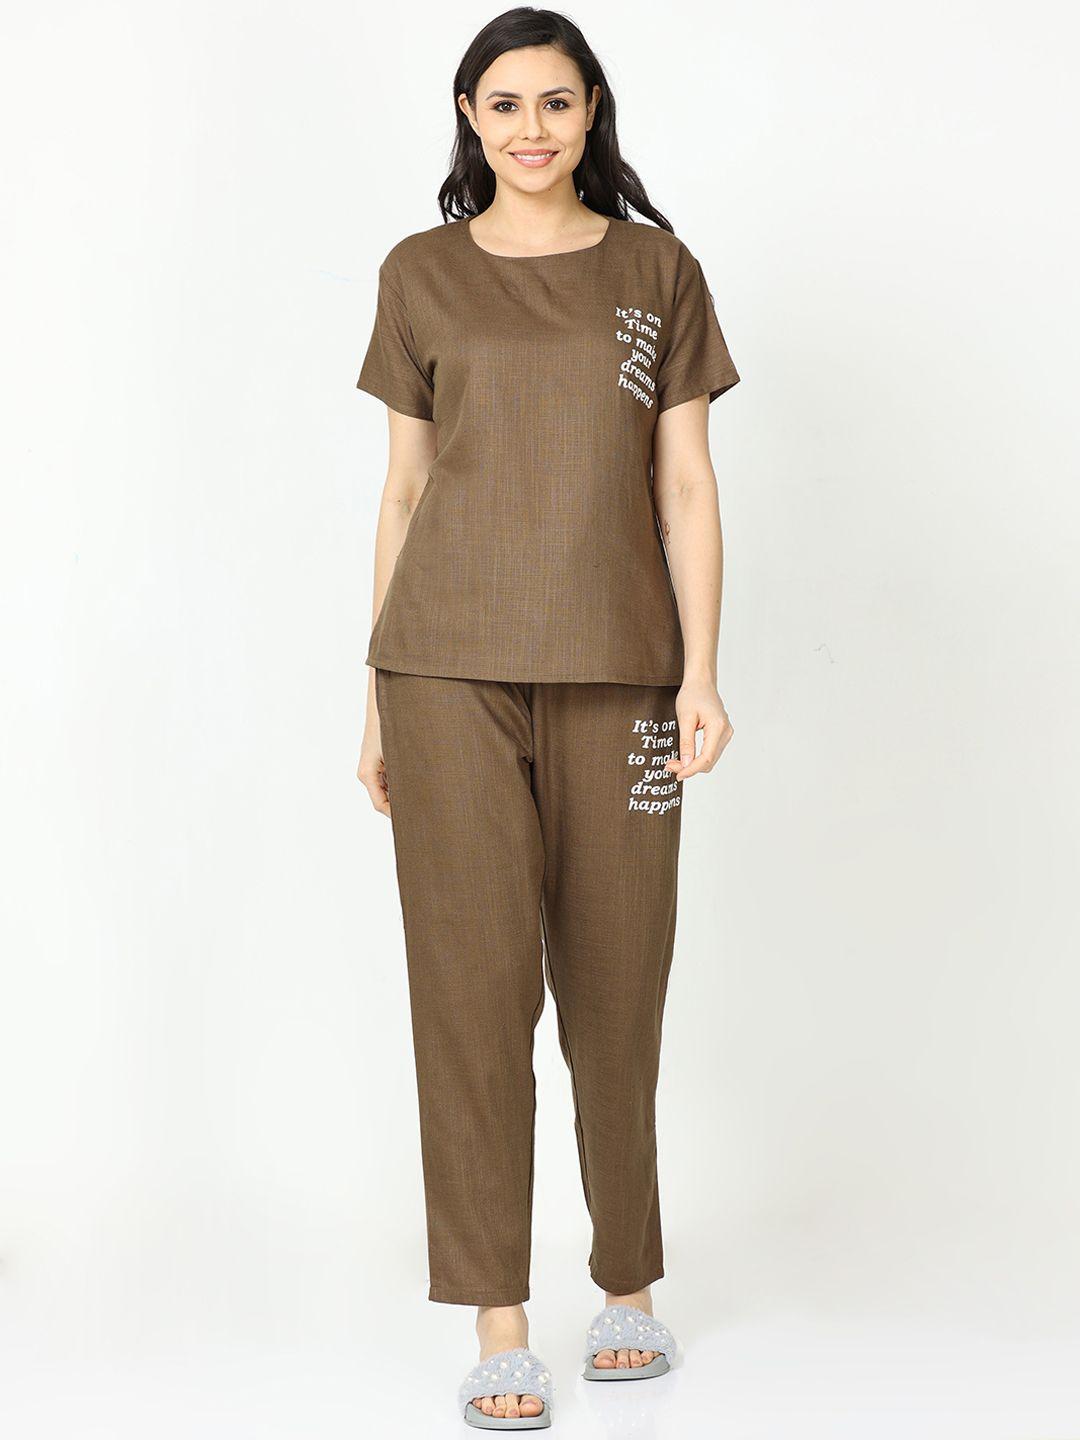 9shines label cotton linen top with palazzos